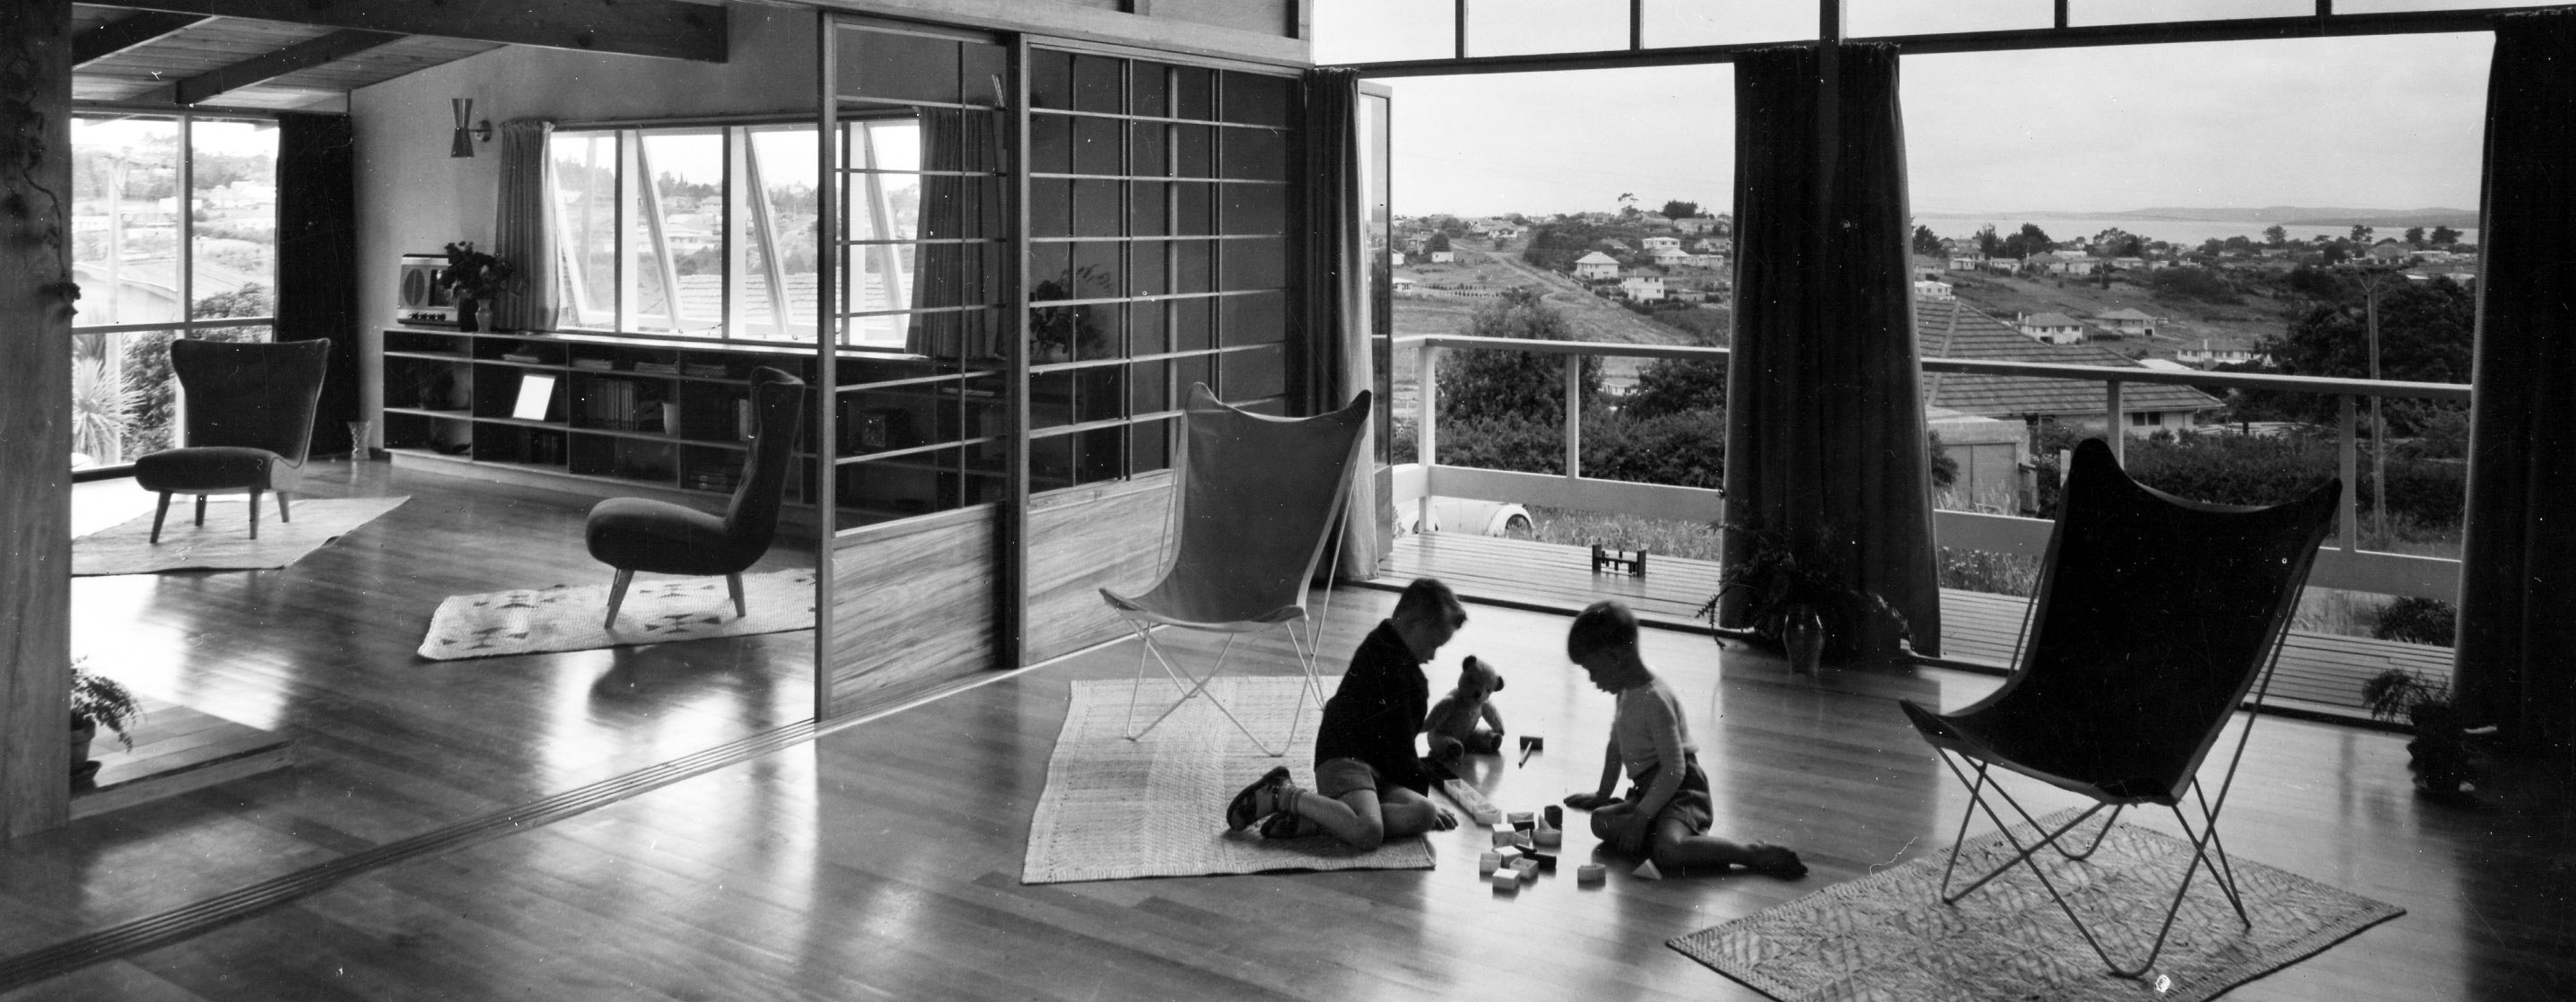 Black and white photo of two children playing on the floor of a large room with a view of other houses and the harbour